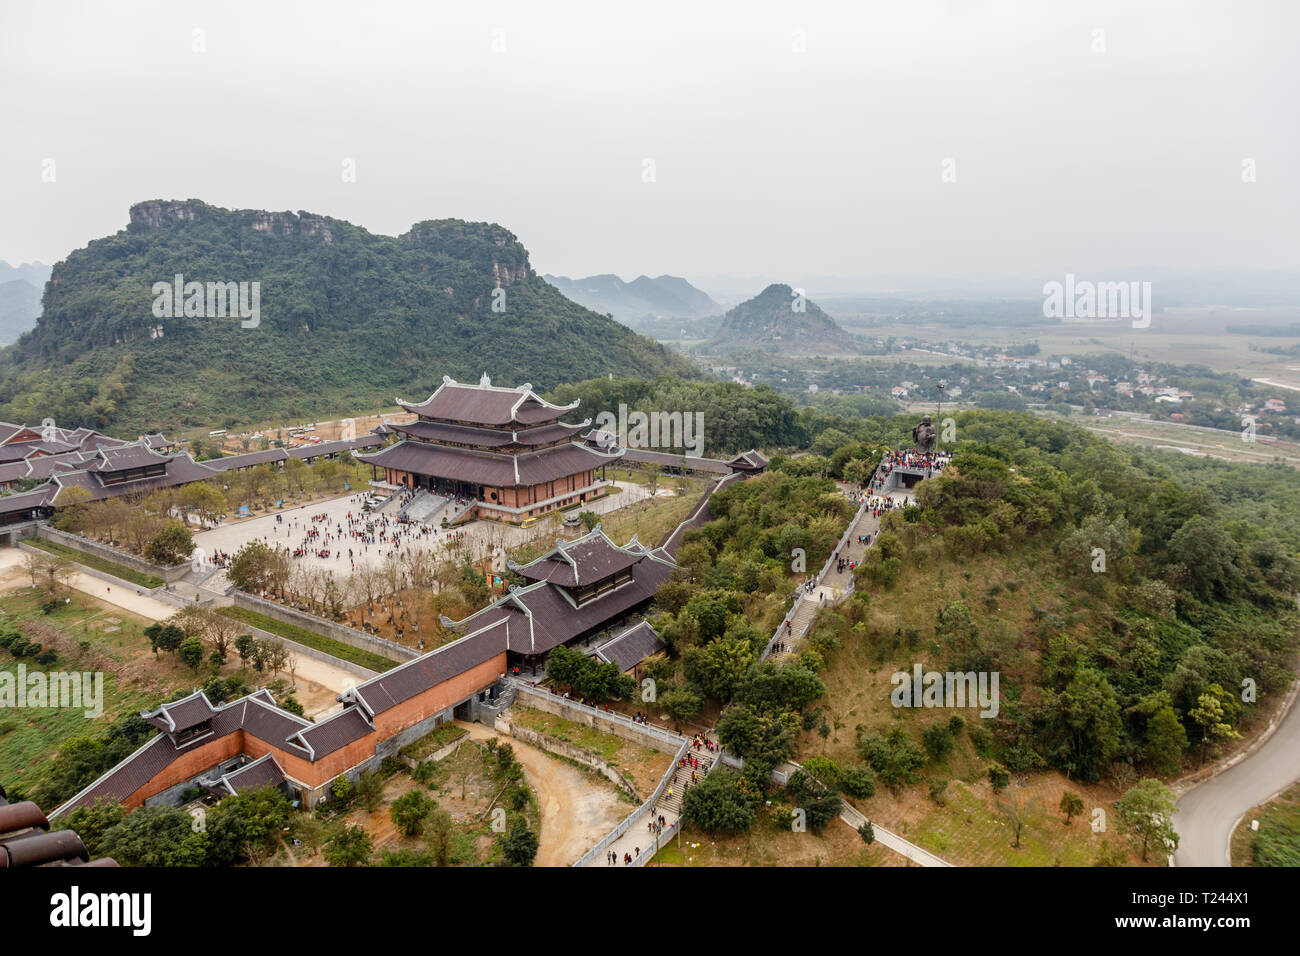 View from pagoda at Bai Dinh Temple, complex of Buddhist temples on Bai Dinh Mountain in Gia Vien District, Ninh Binh Province, Vietnam. Stock Photo